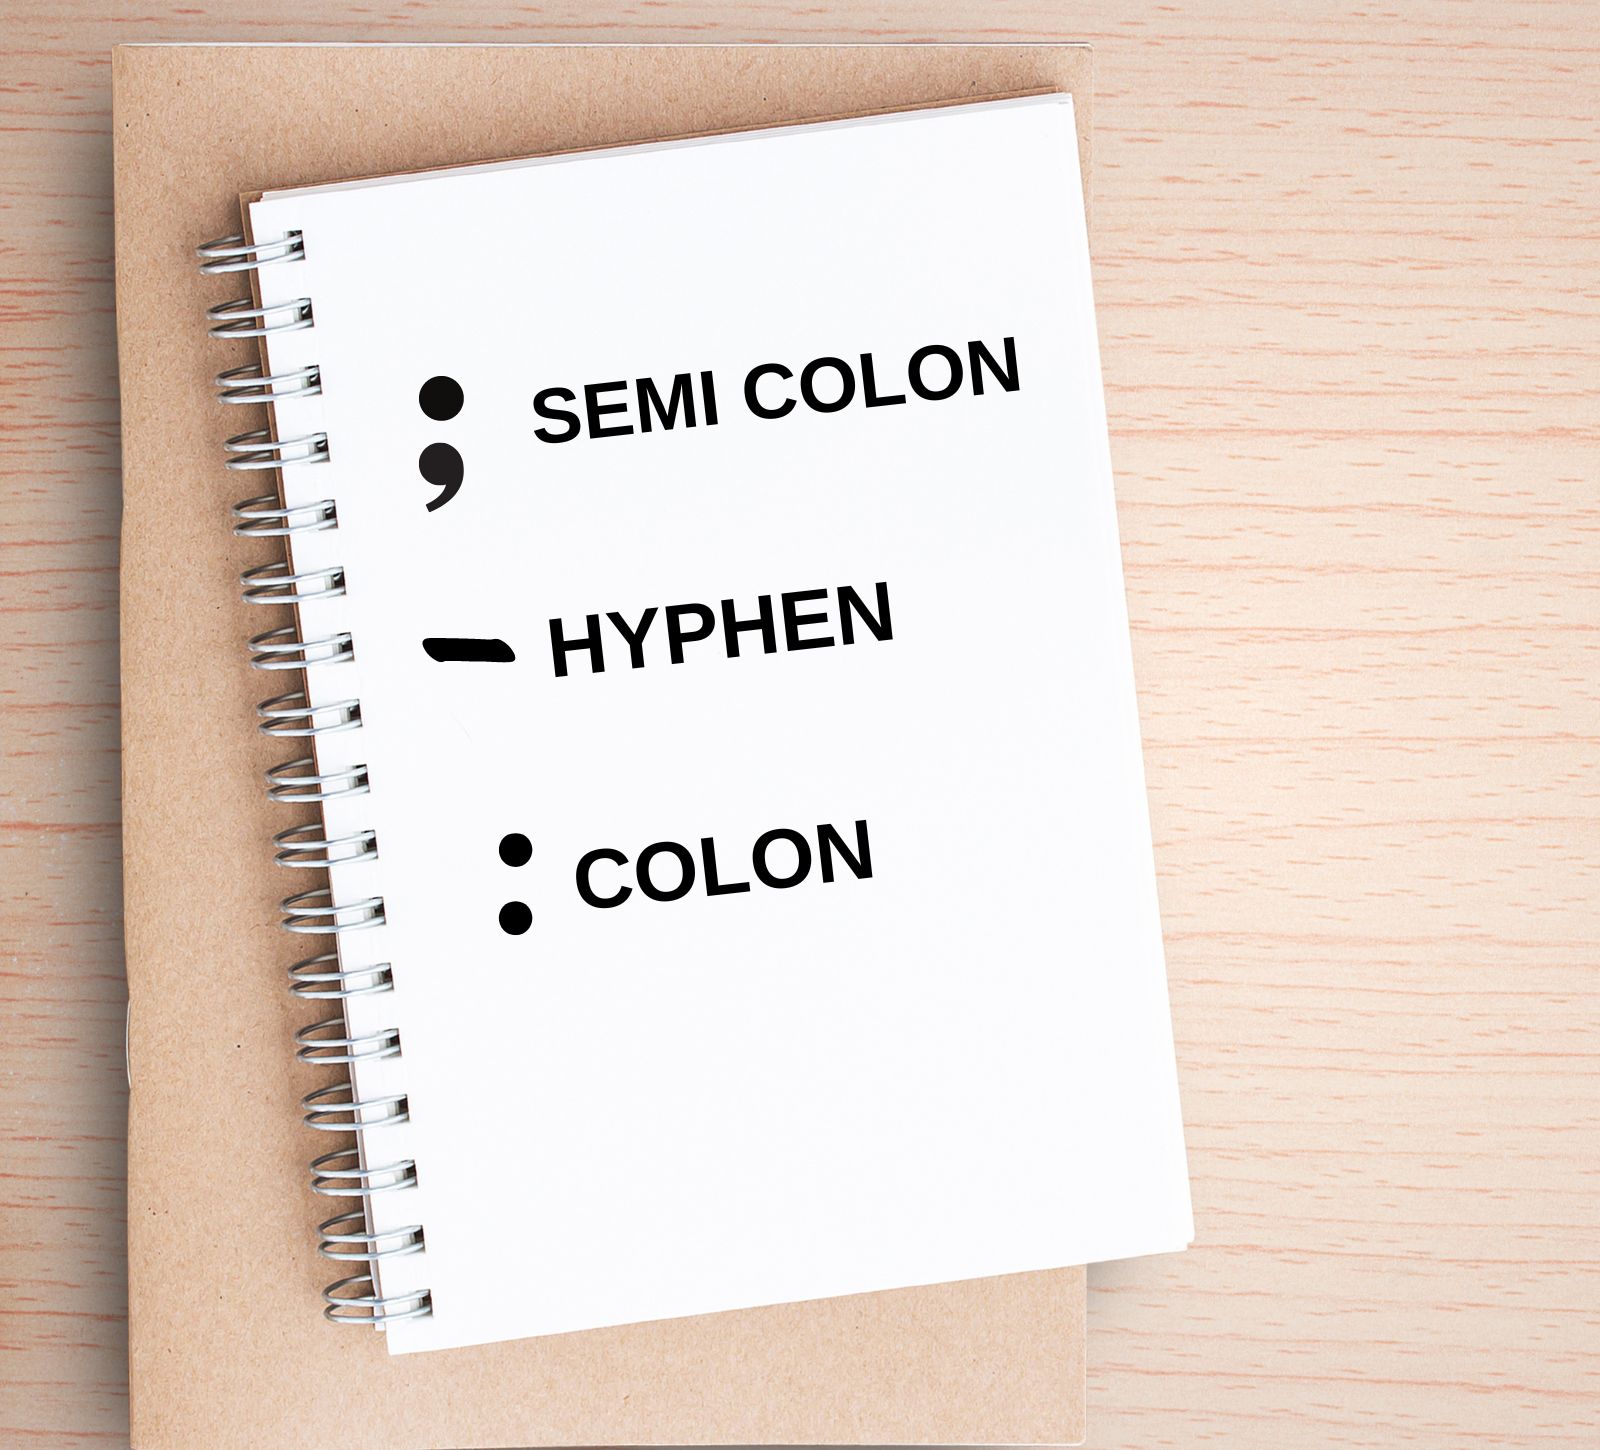 Kitchen Table CEOs Blog - How to use Semi Colons, Hyphens and Colons - image of notebook on desk with the words semi colon, hyphen and colon on them - with examples of the icons.